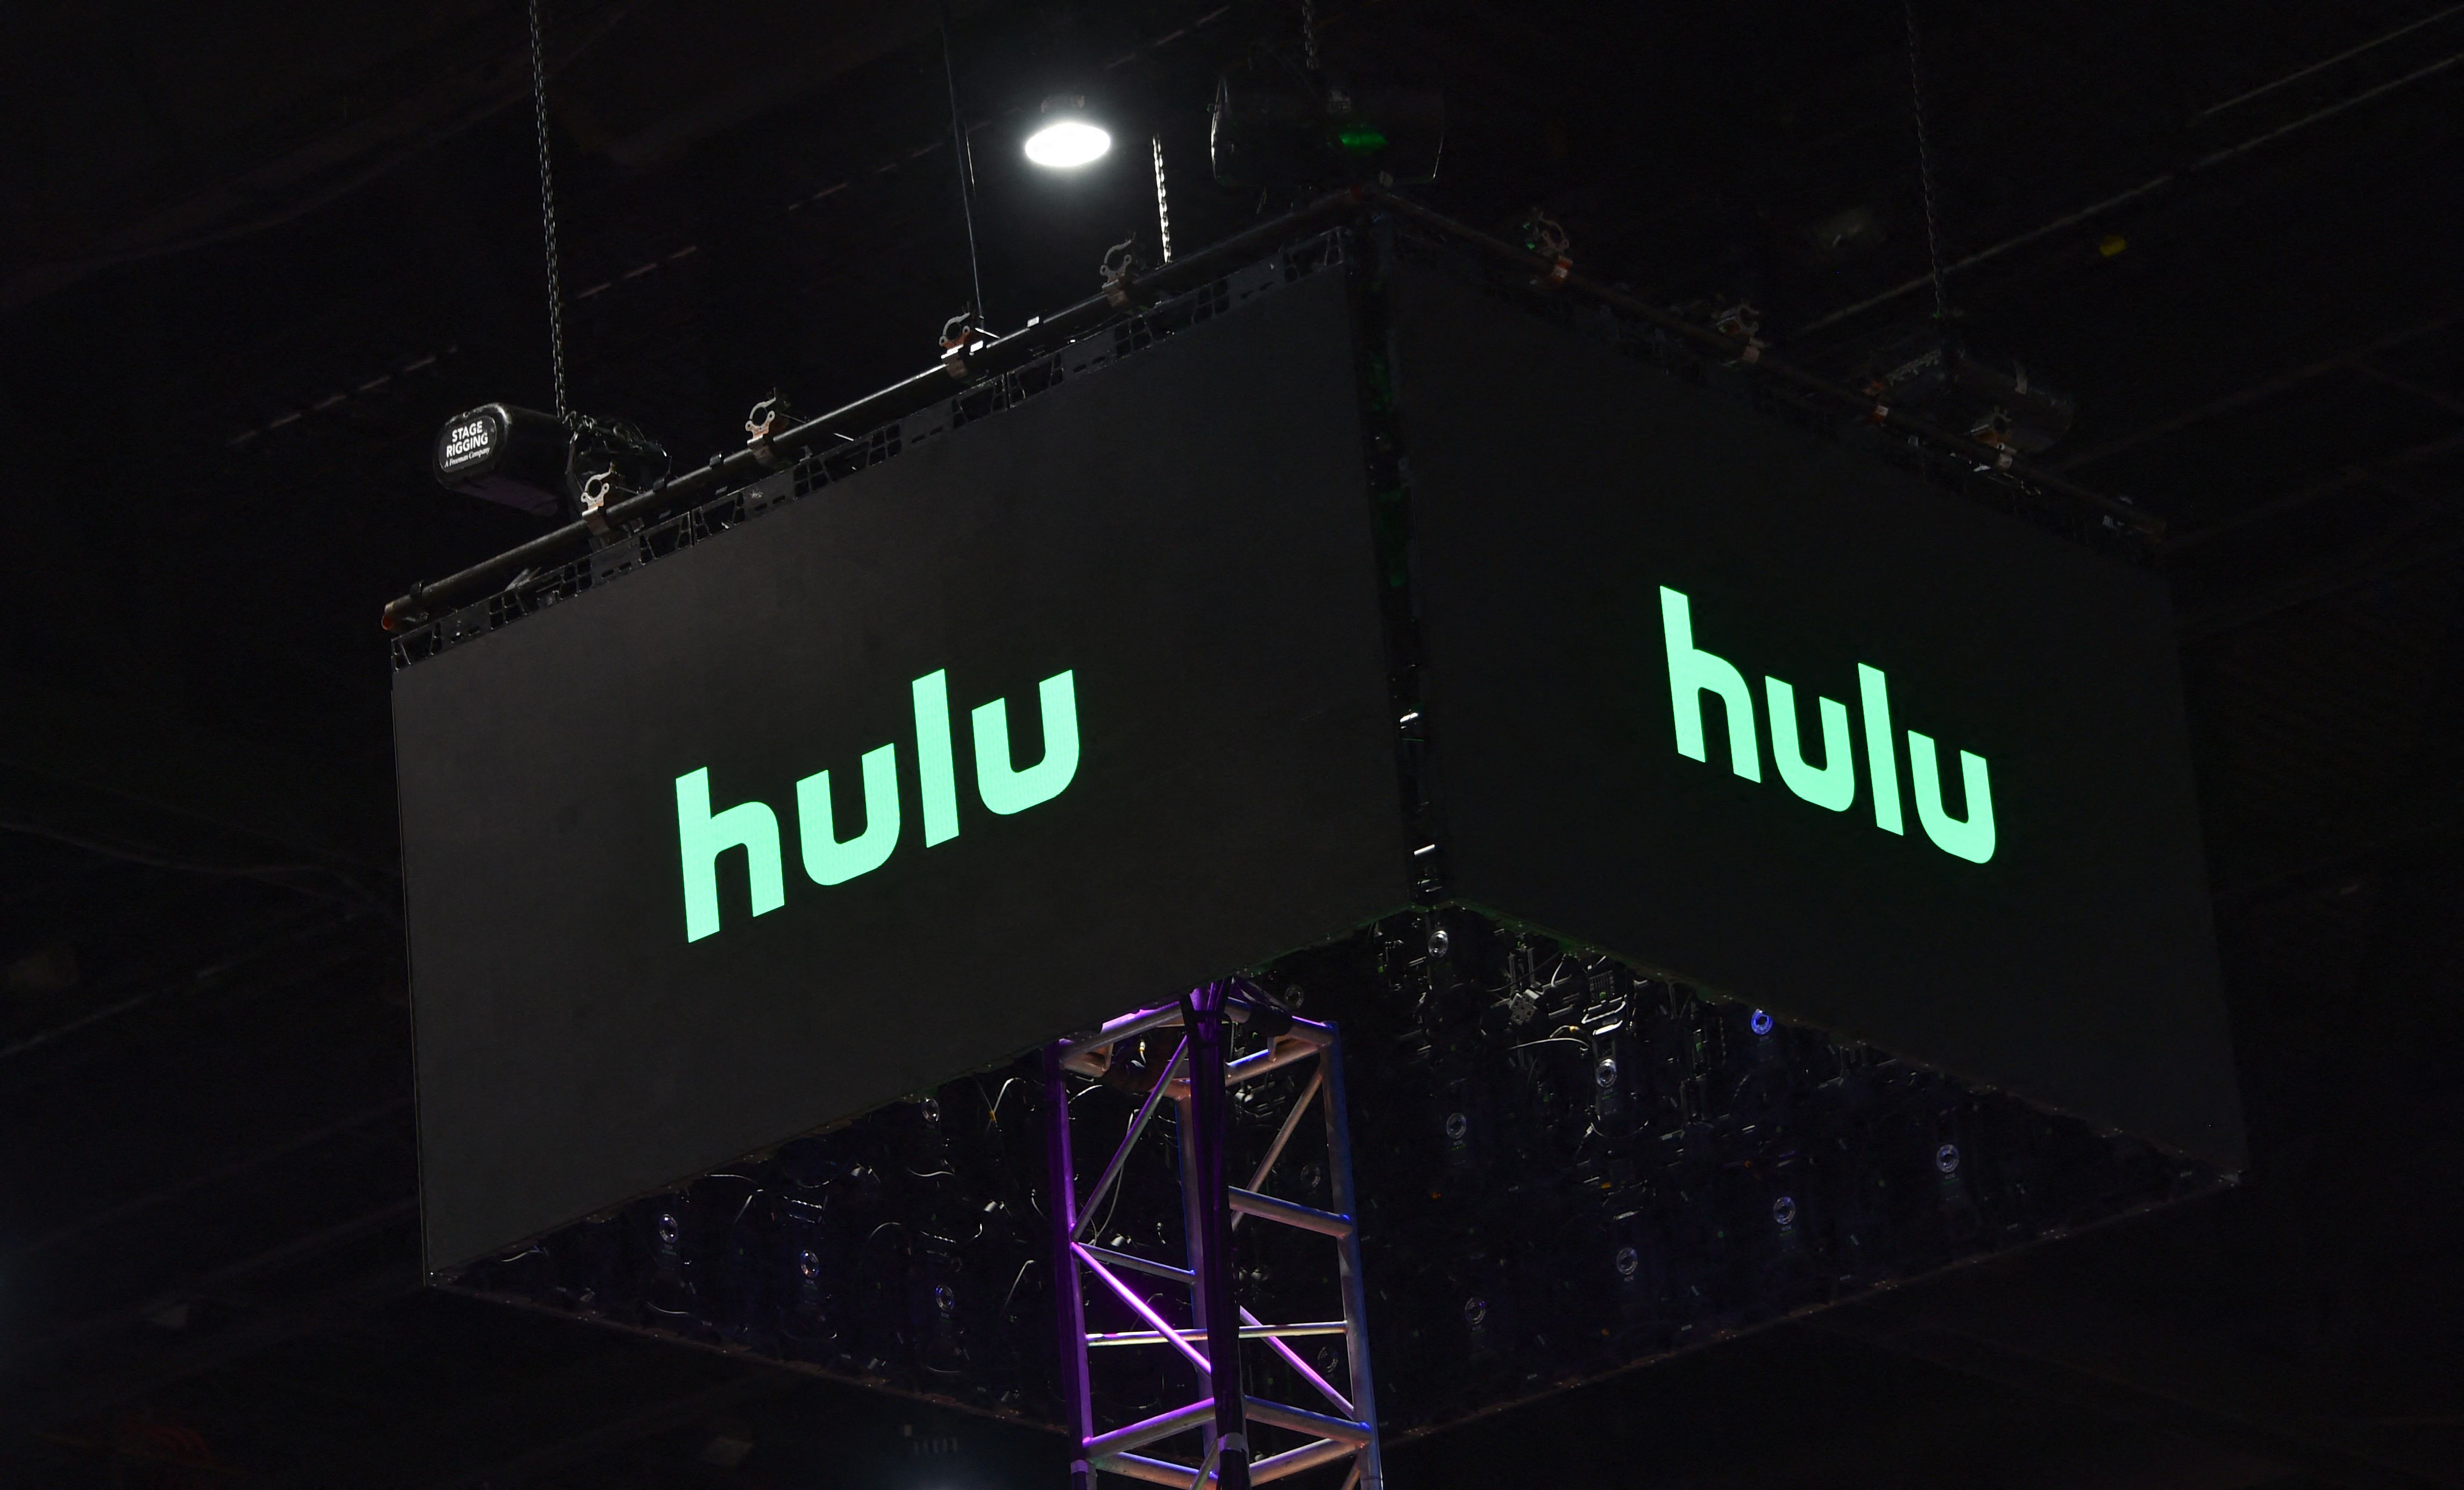 Today's the Last Day to Grab a Full Year of Hulu for $1/Month